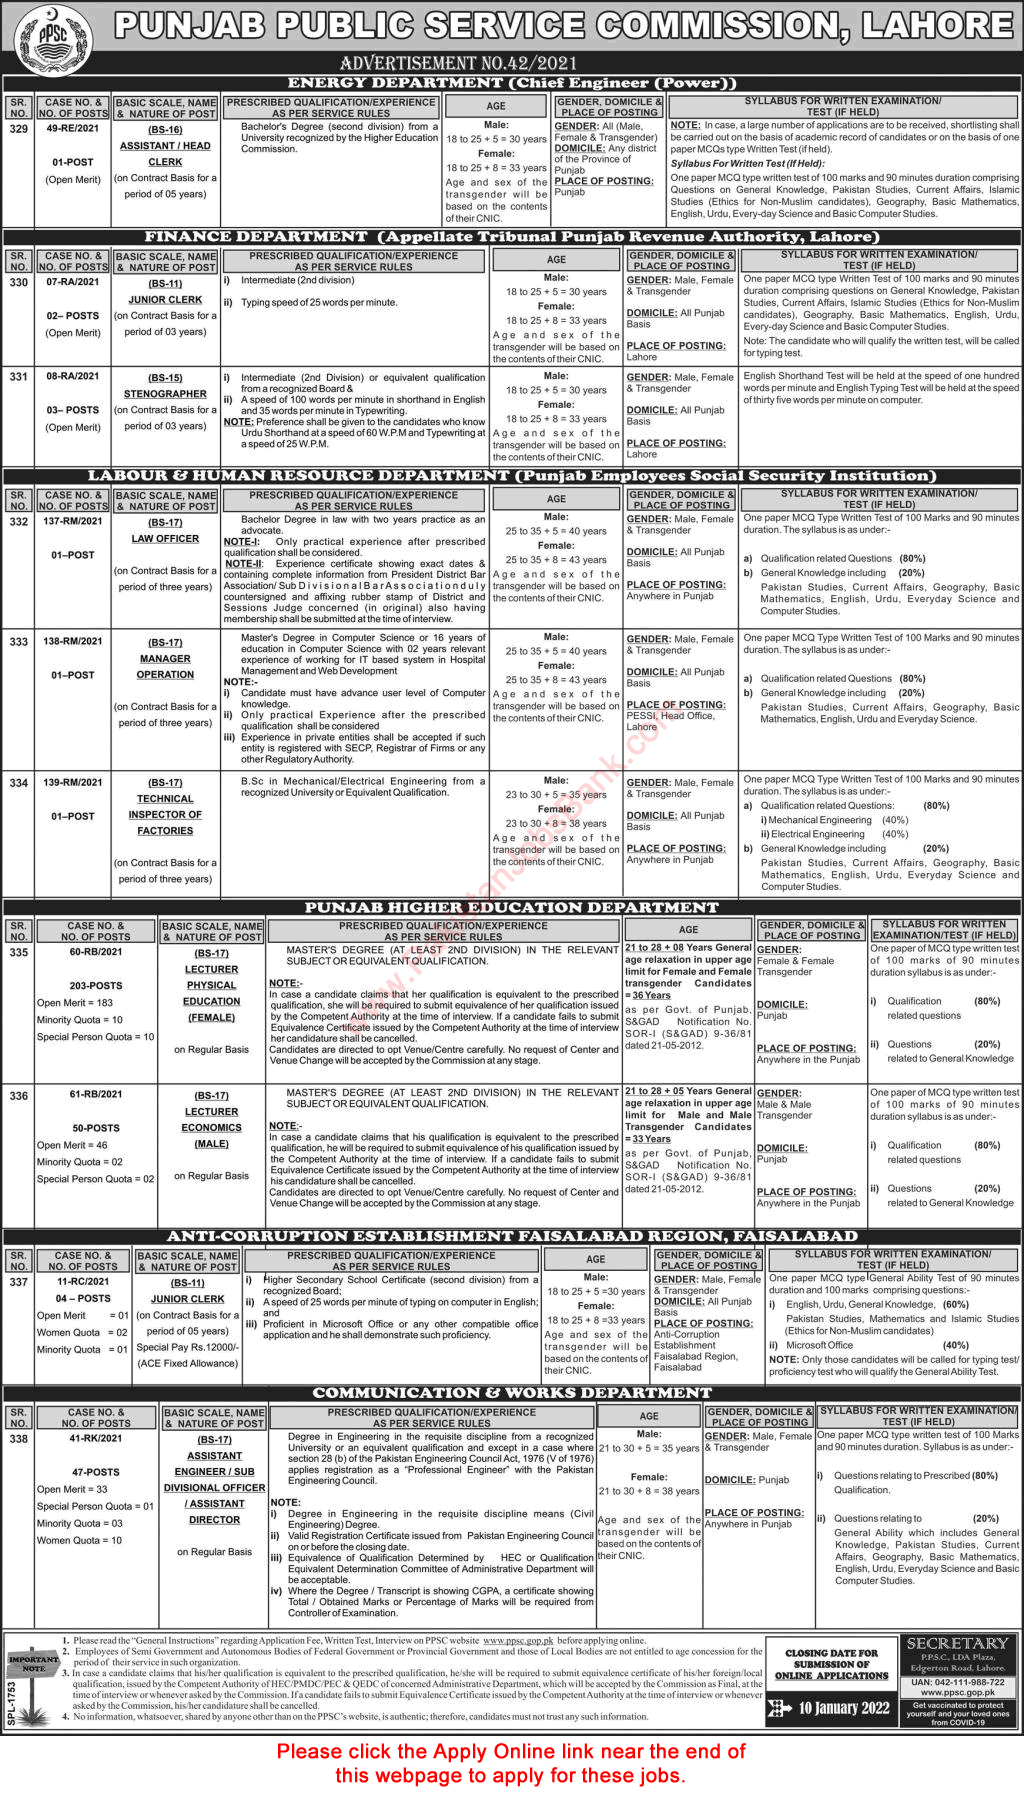 PPSC Jobs December 2021 / 2022 Apply Online Consolidated Advertisement No 42/2021 Latest